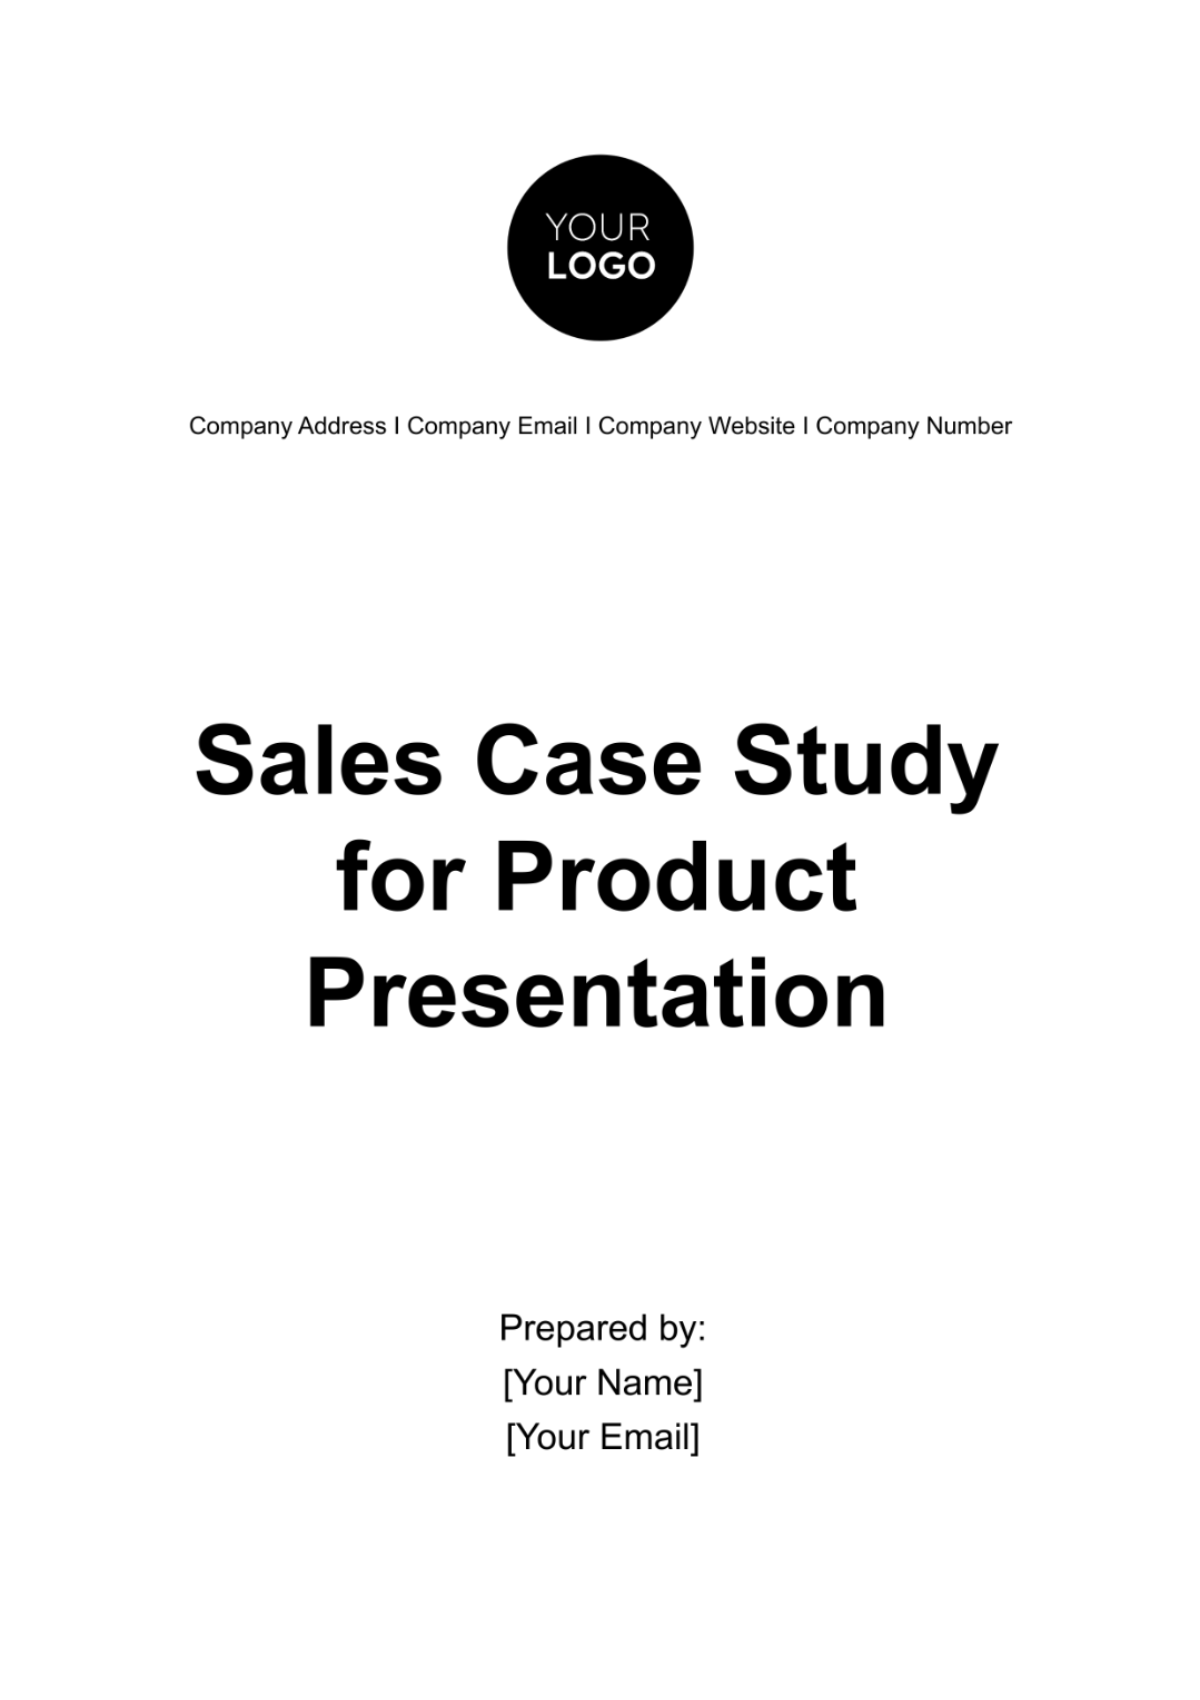 Sales Case Study for Product Presentation Template